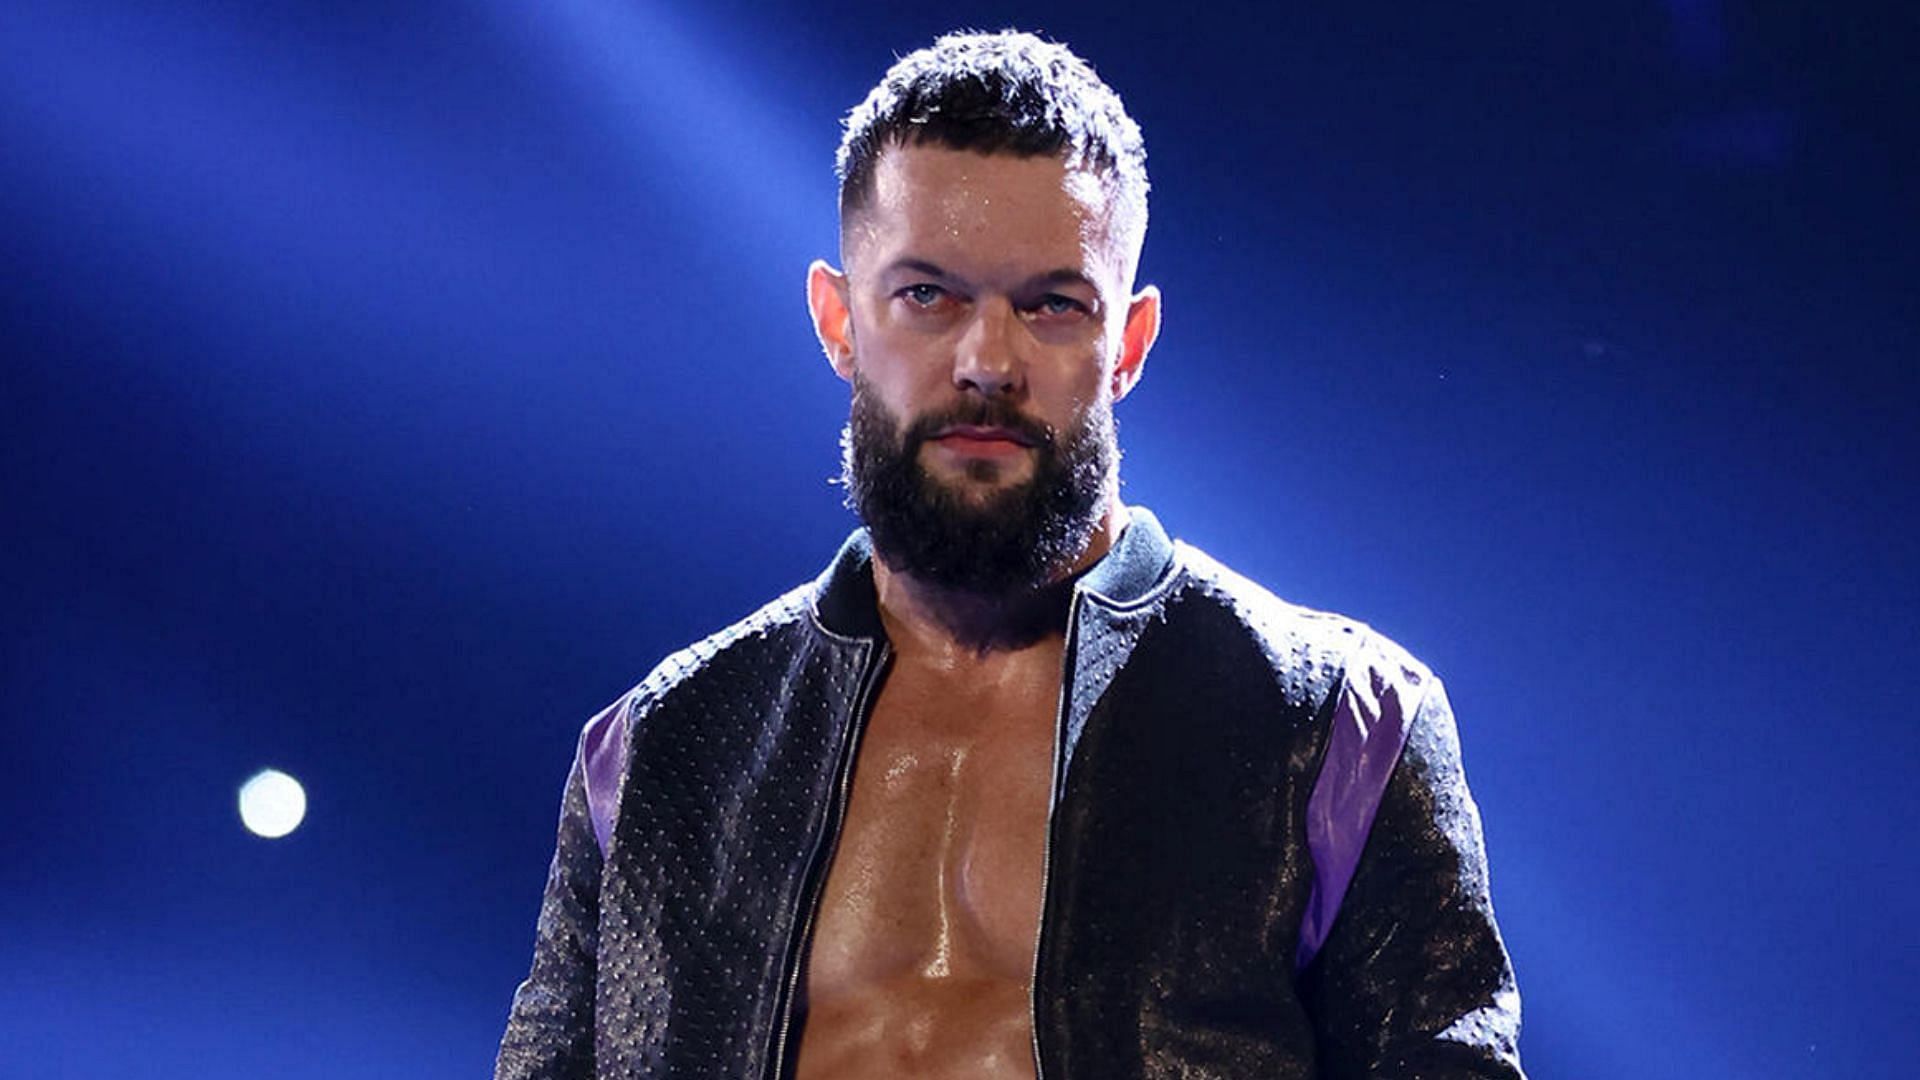 Finn Balor and The Judgment Day enjoyed a momentous victory at Extreme Rules